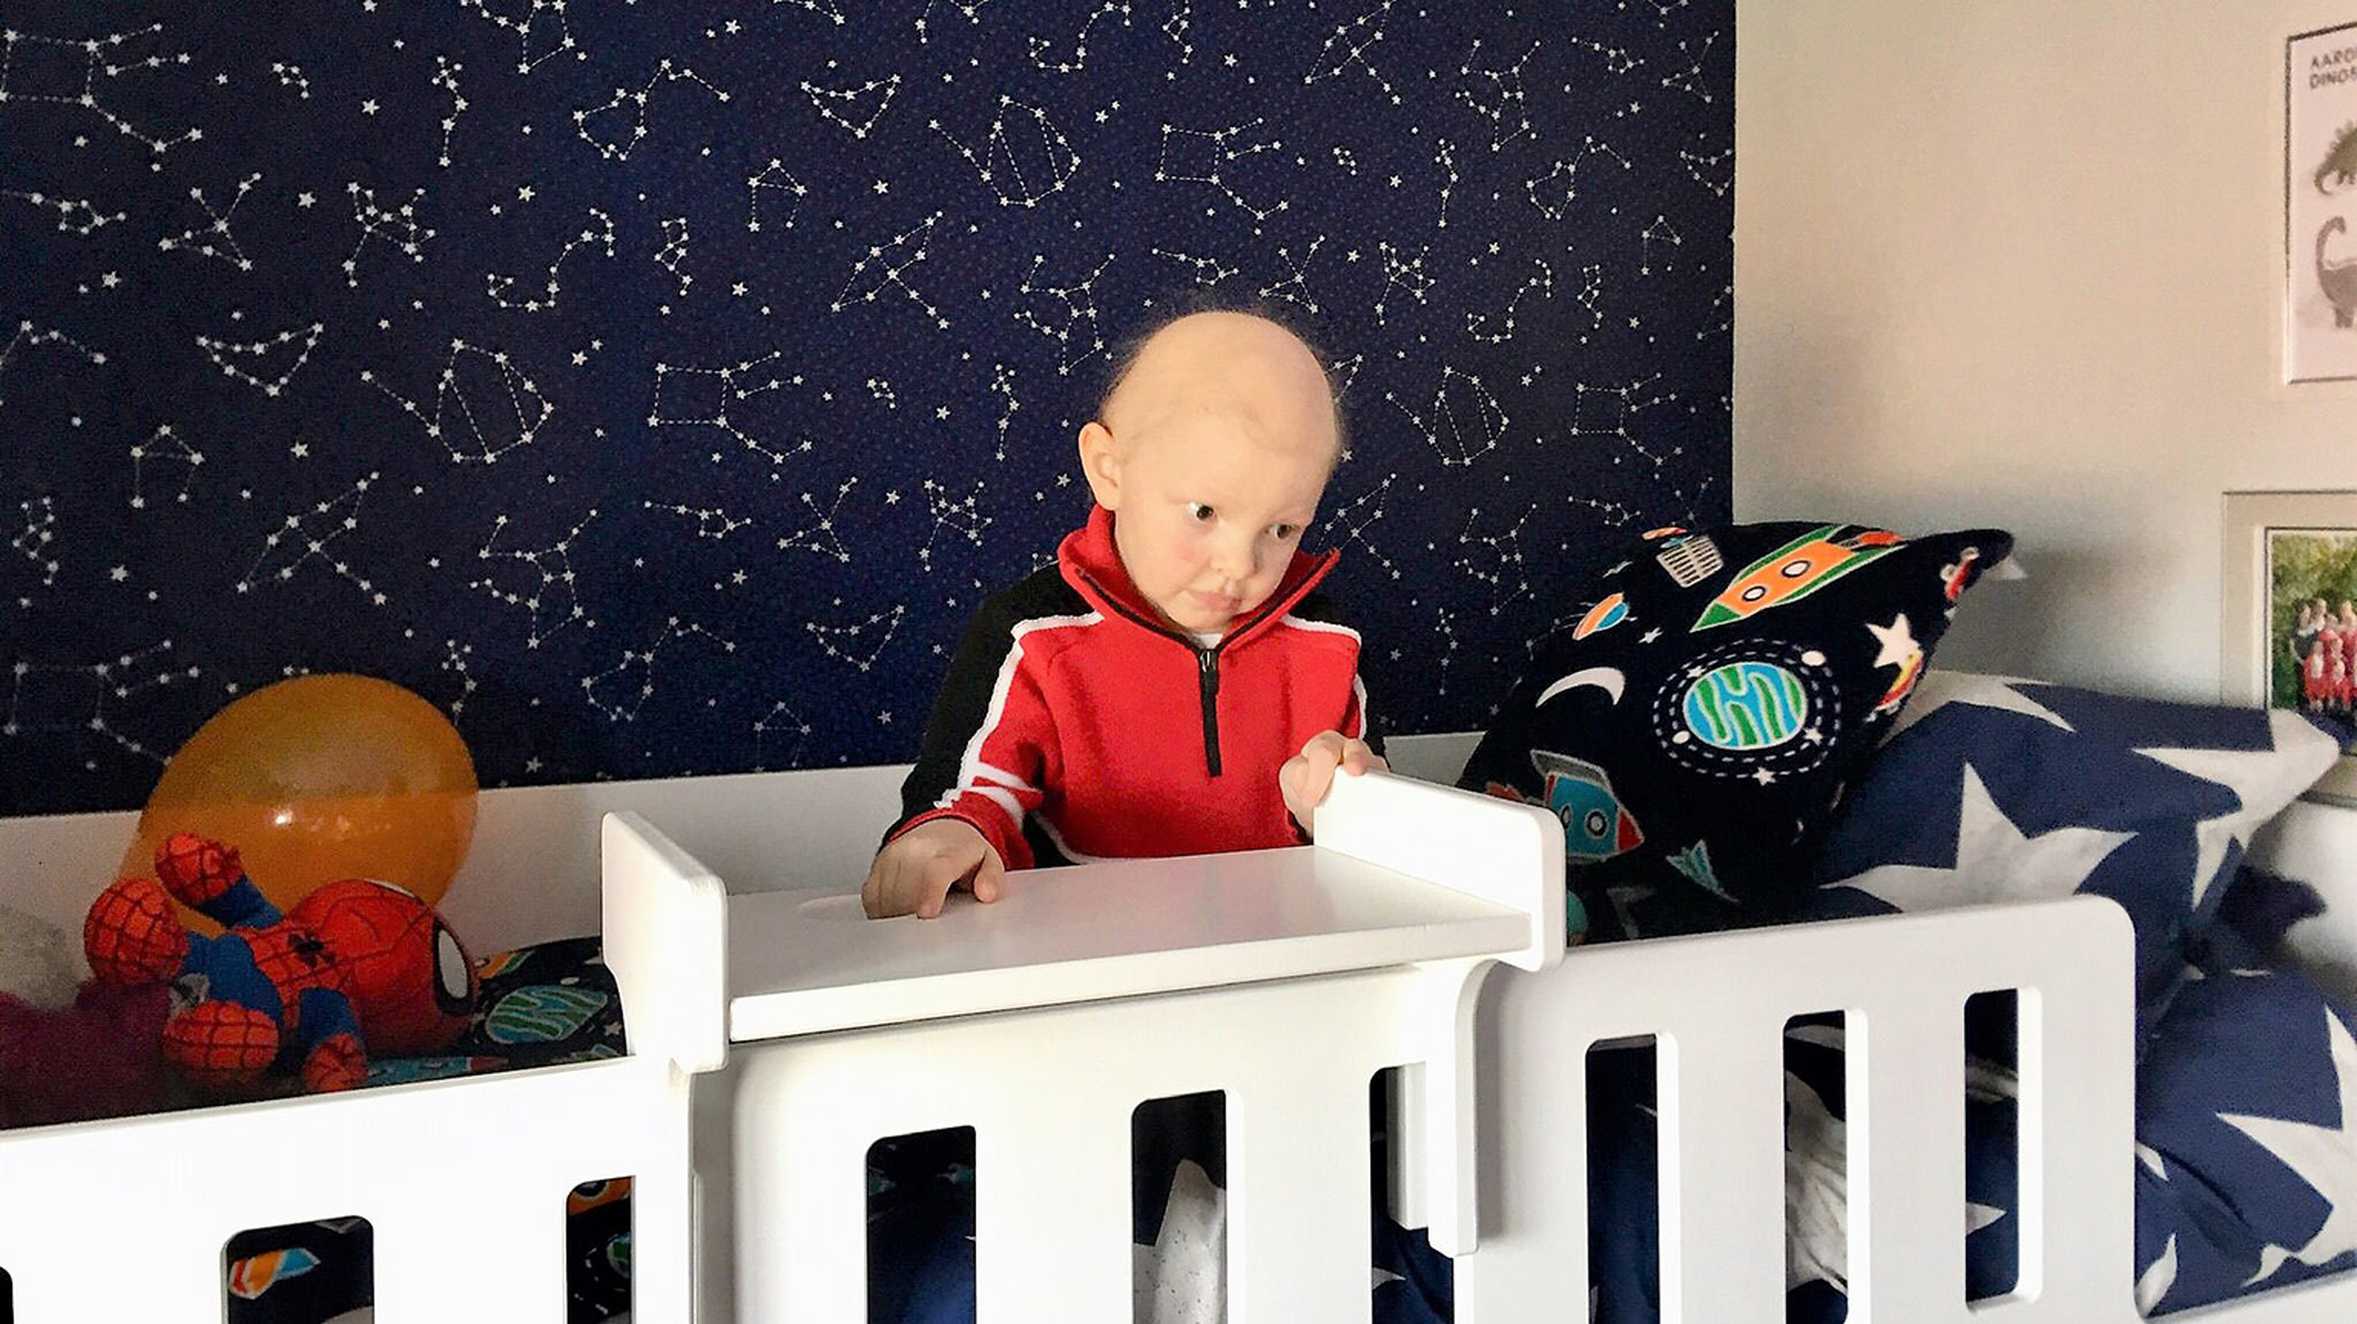 With his new cabin bed and his starry wallpaper, Aaron can imagine himself skydiving with those who have skydived for the Make A Wish UK charity.